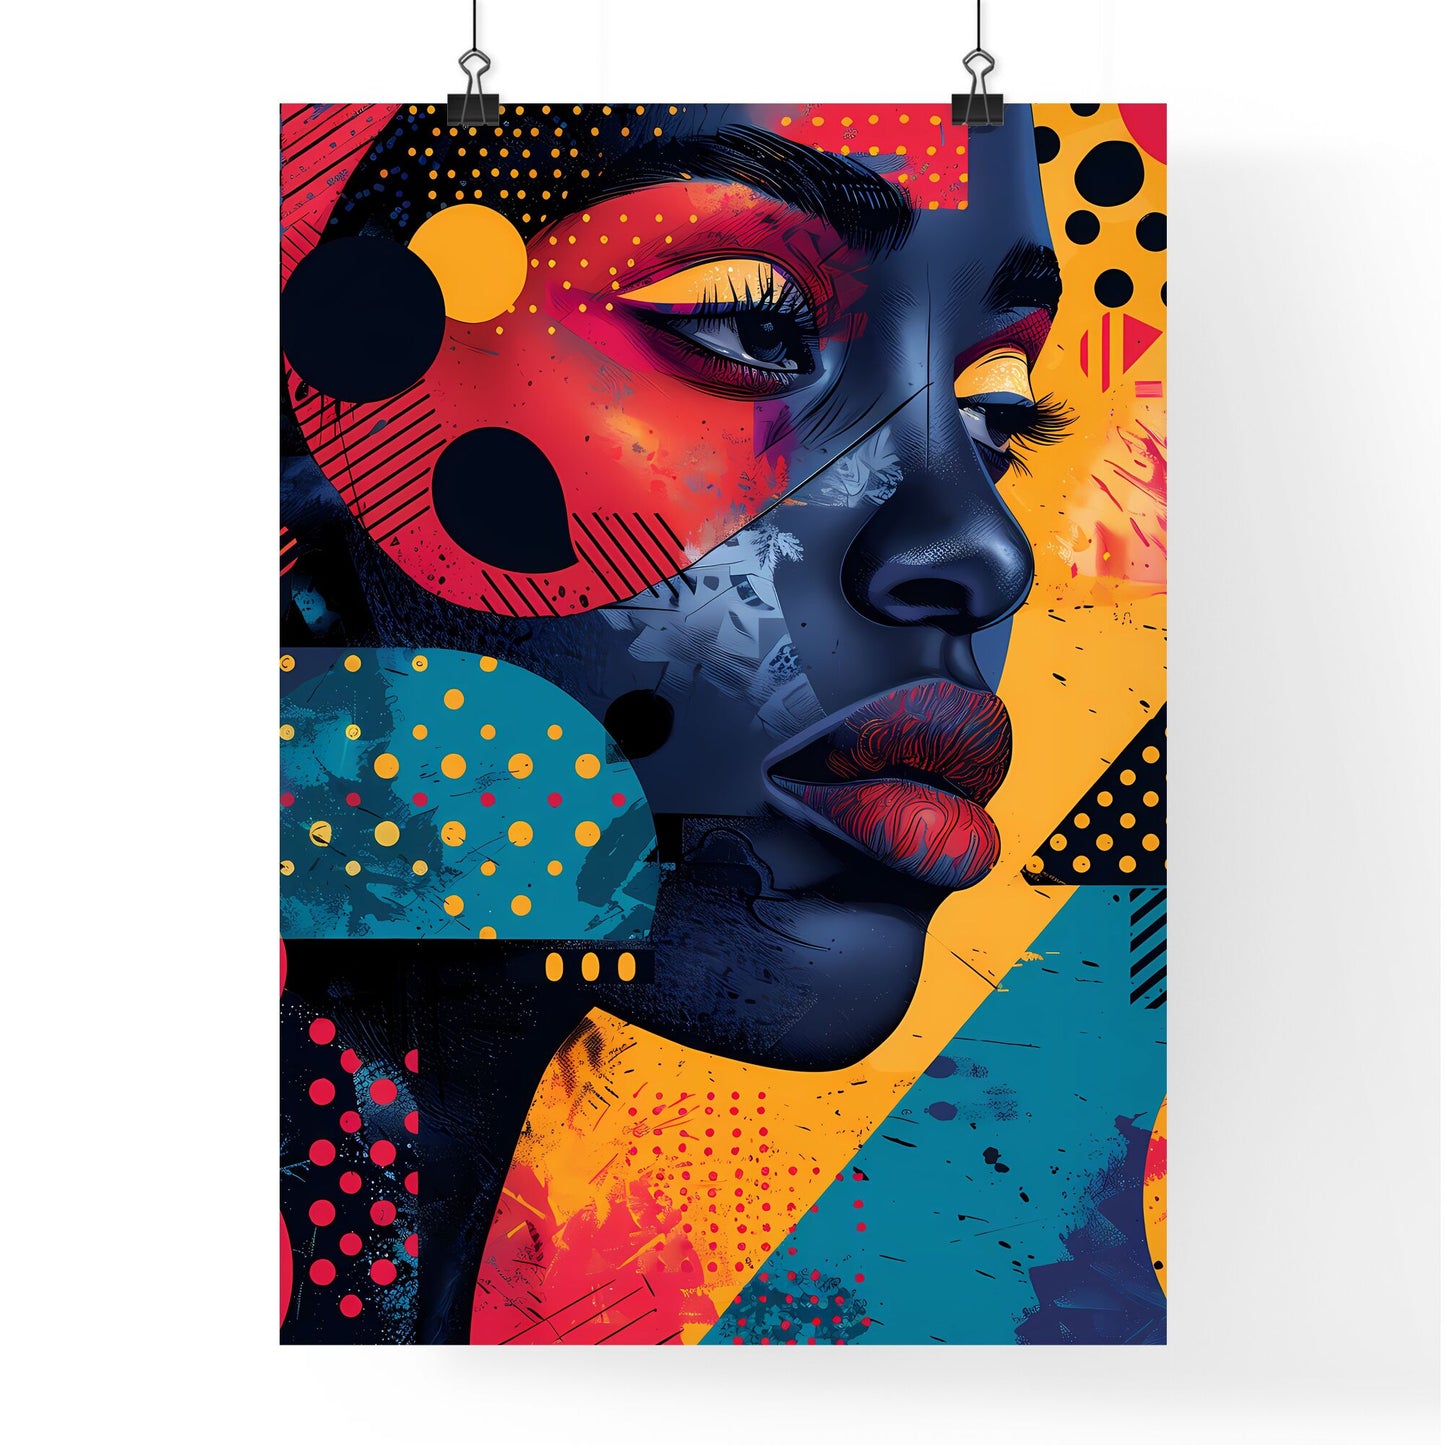 Vibrant African Urban Art: Abstract Human Forms, Patterns & Pastel Colors - Striking Modern Painting Default Title